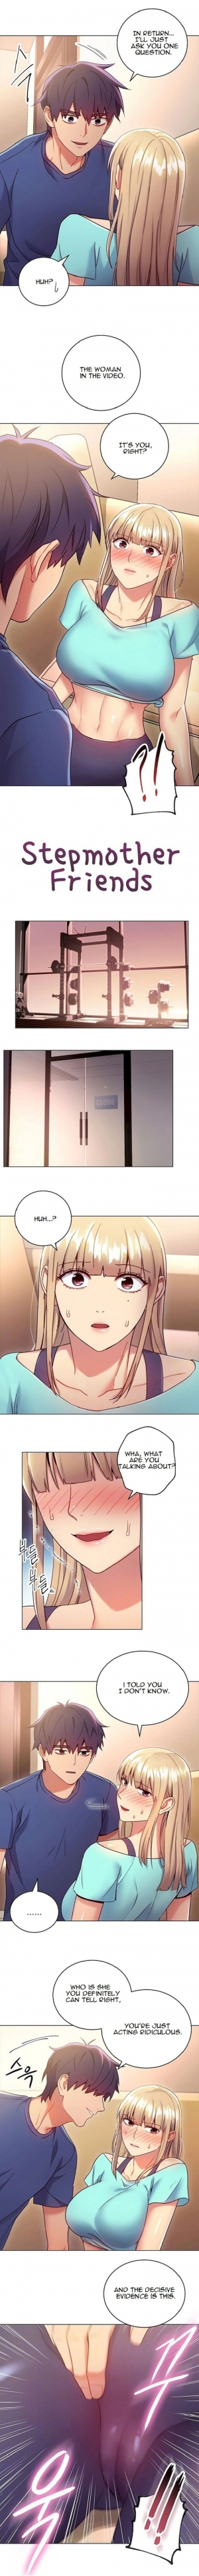  [Neck Pilllow] Stepmother Friends Ch.39/? [English] [Hentai Universe] NEW! 13/10/2020  - Page 163